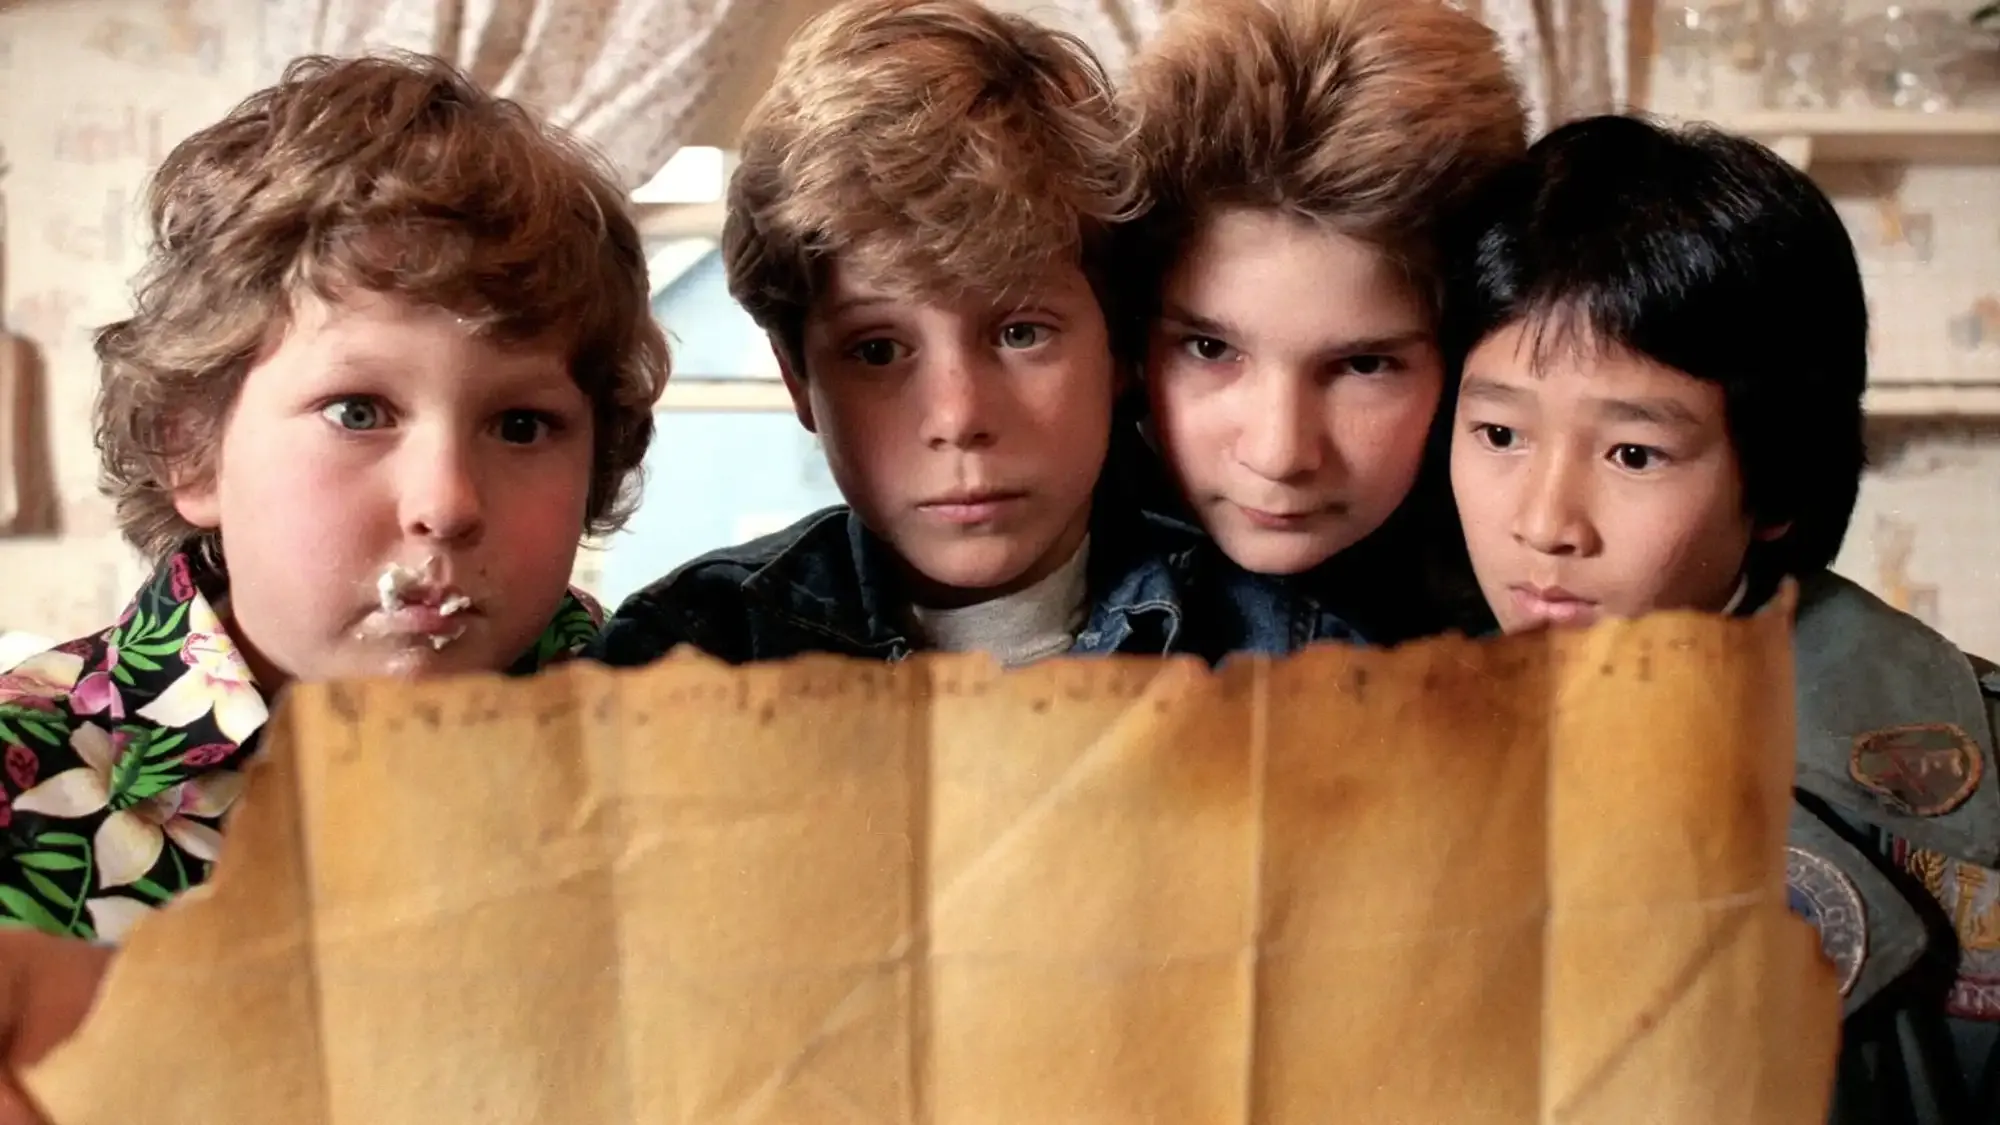 The Goonies movie review